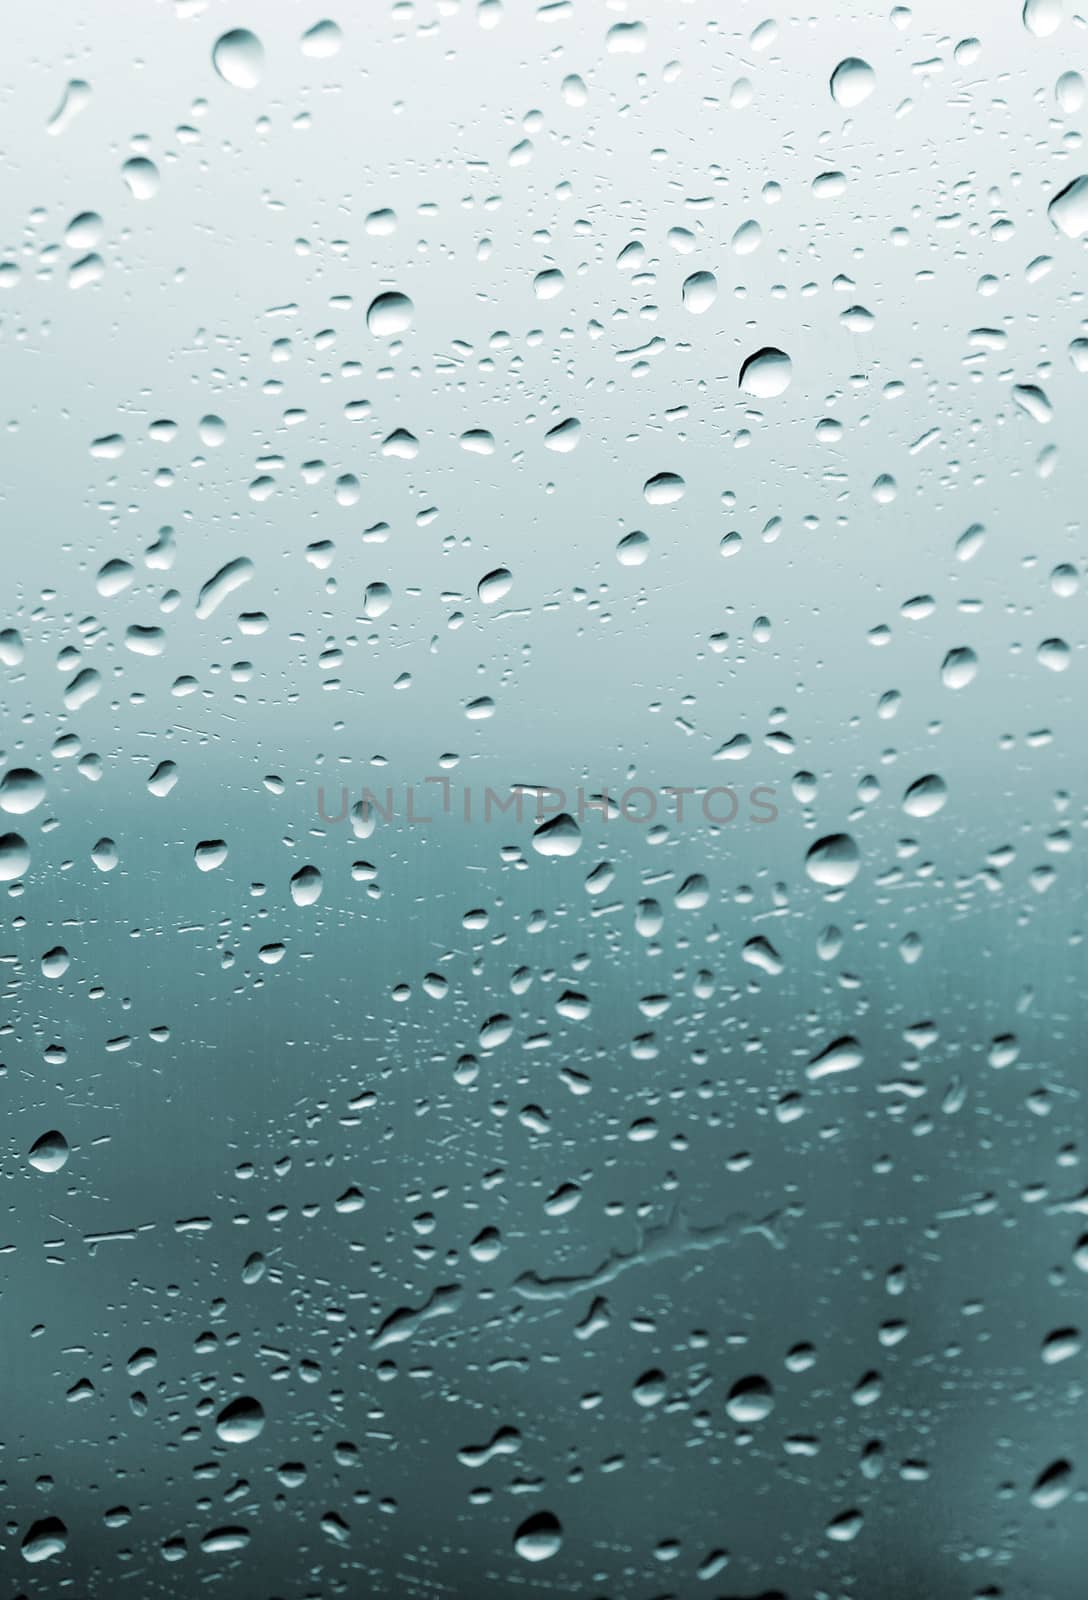 Raindrops on the glass surface by ptxgarfield